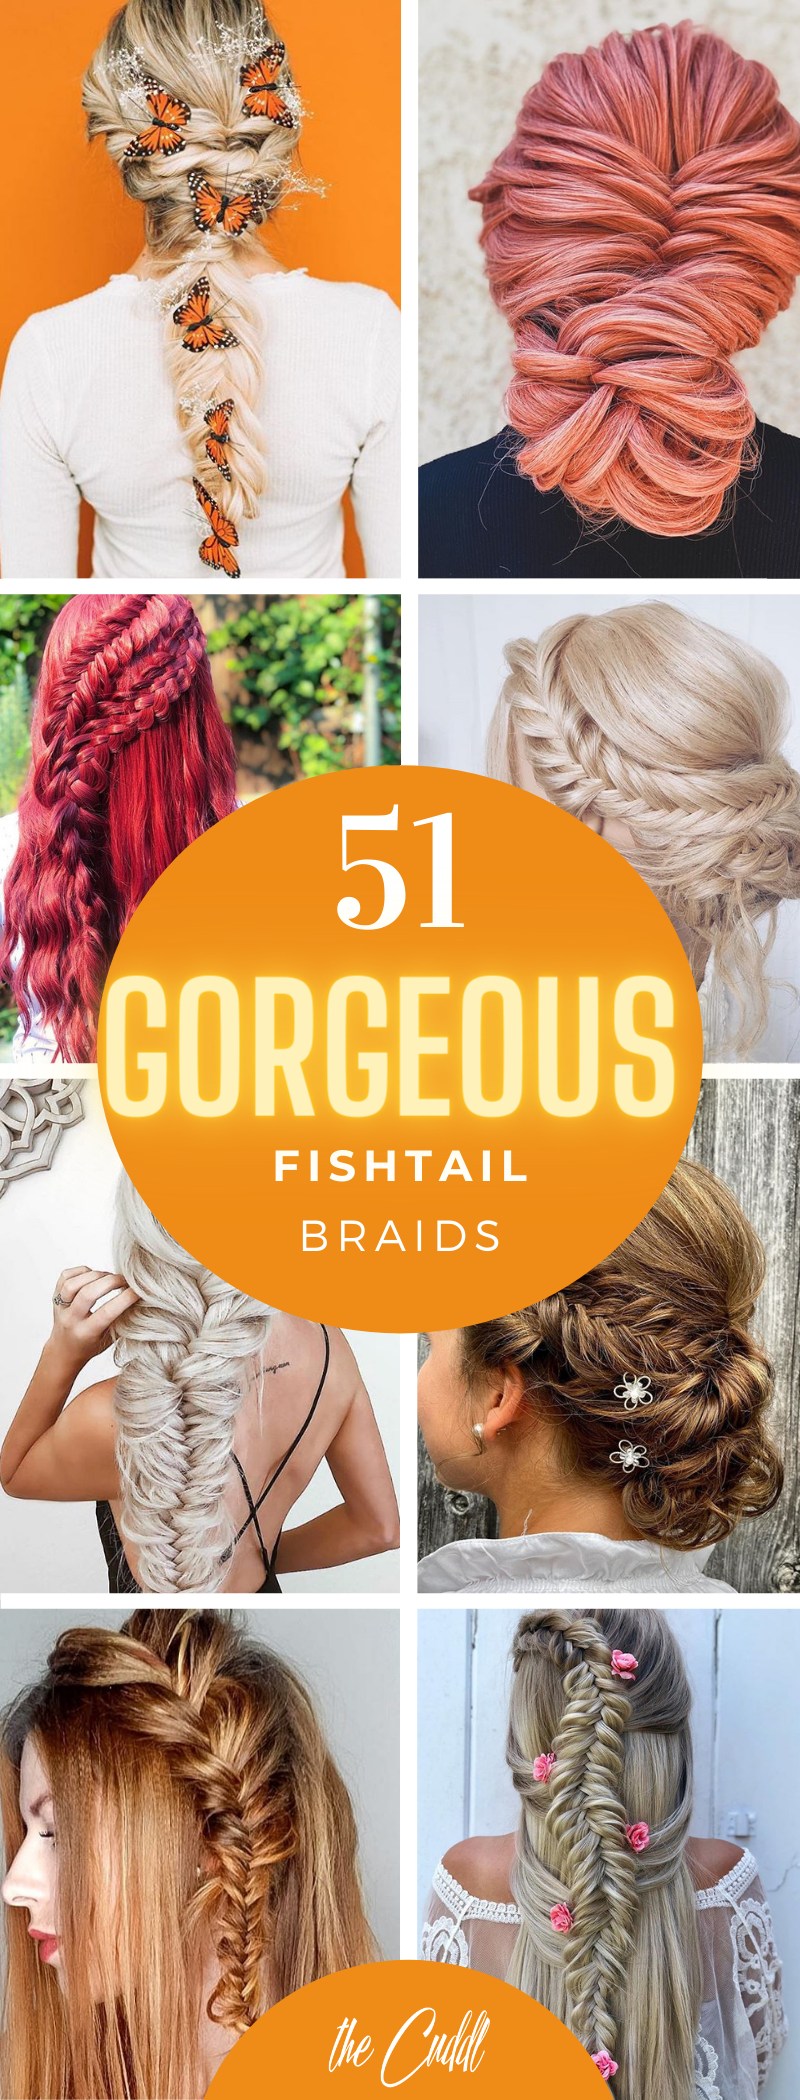 50 Amazing Fishtail Braid Hairstyles to Inspire You